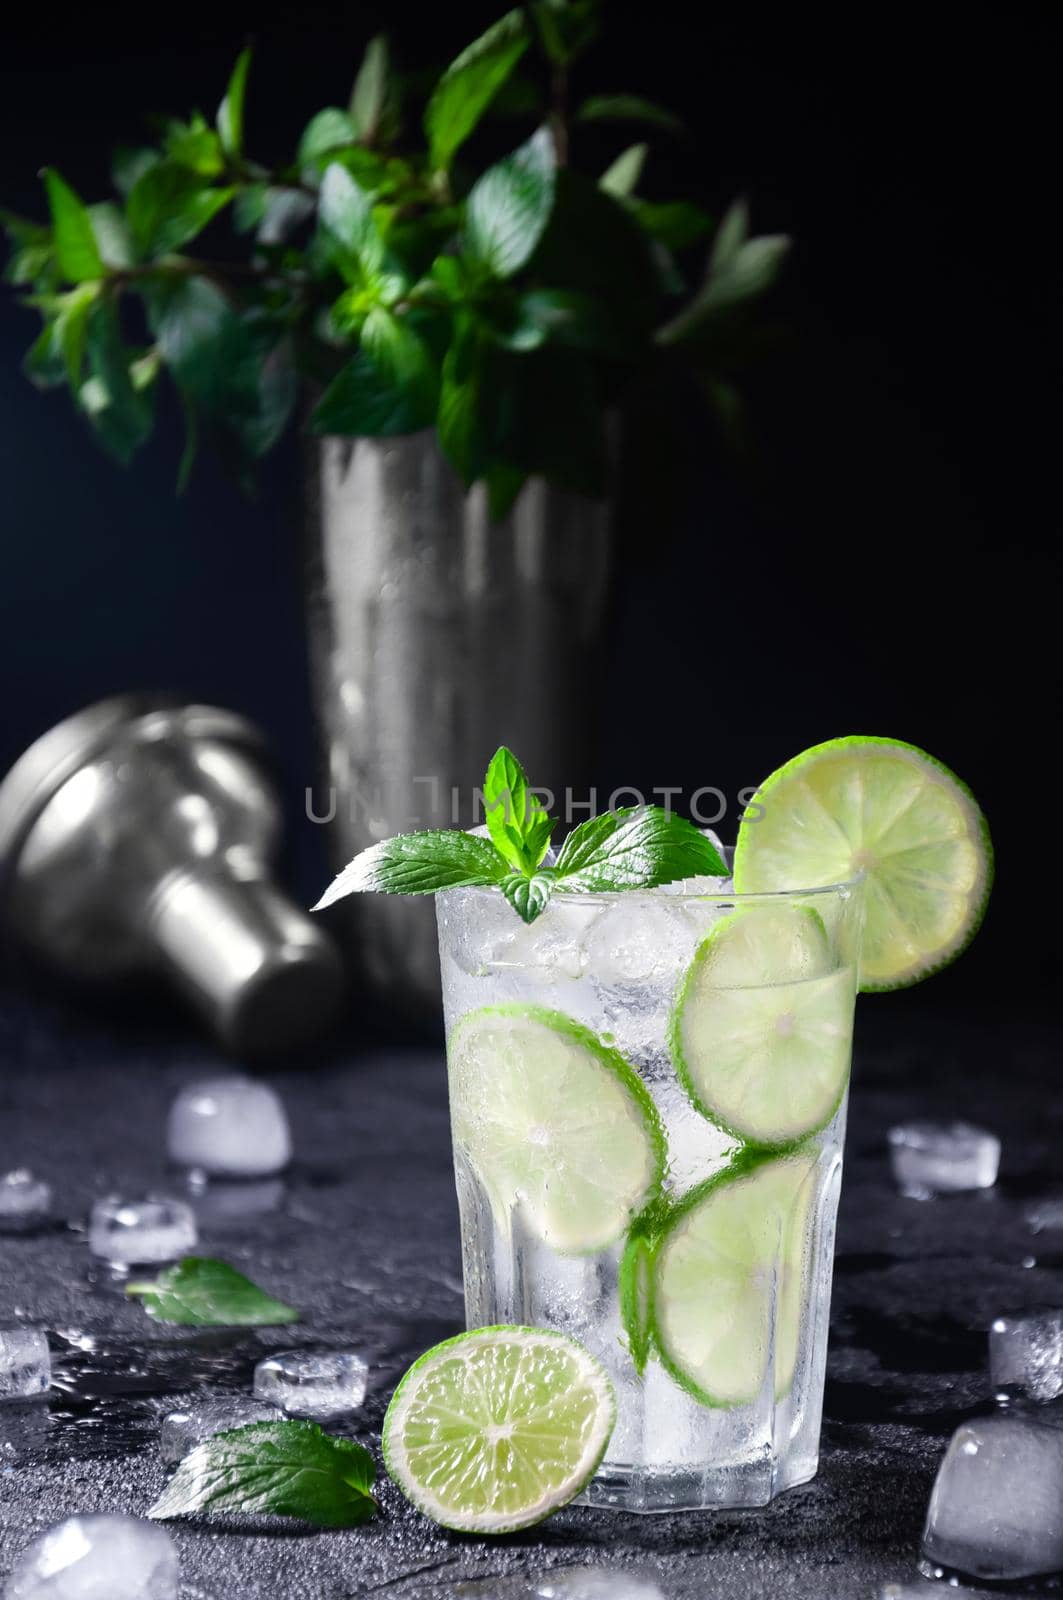 Cocktail Mojito or Lemonade with Lime, Mint and Ice on Dark Background. Concept Fresh Summer Drinks.